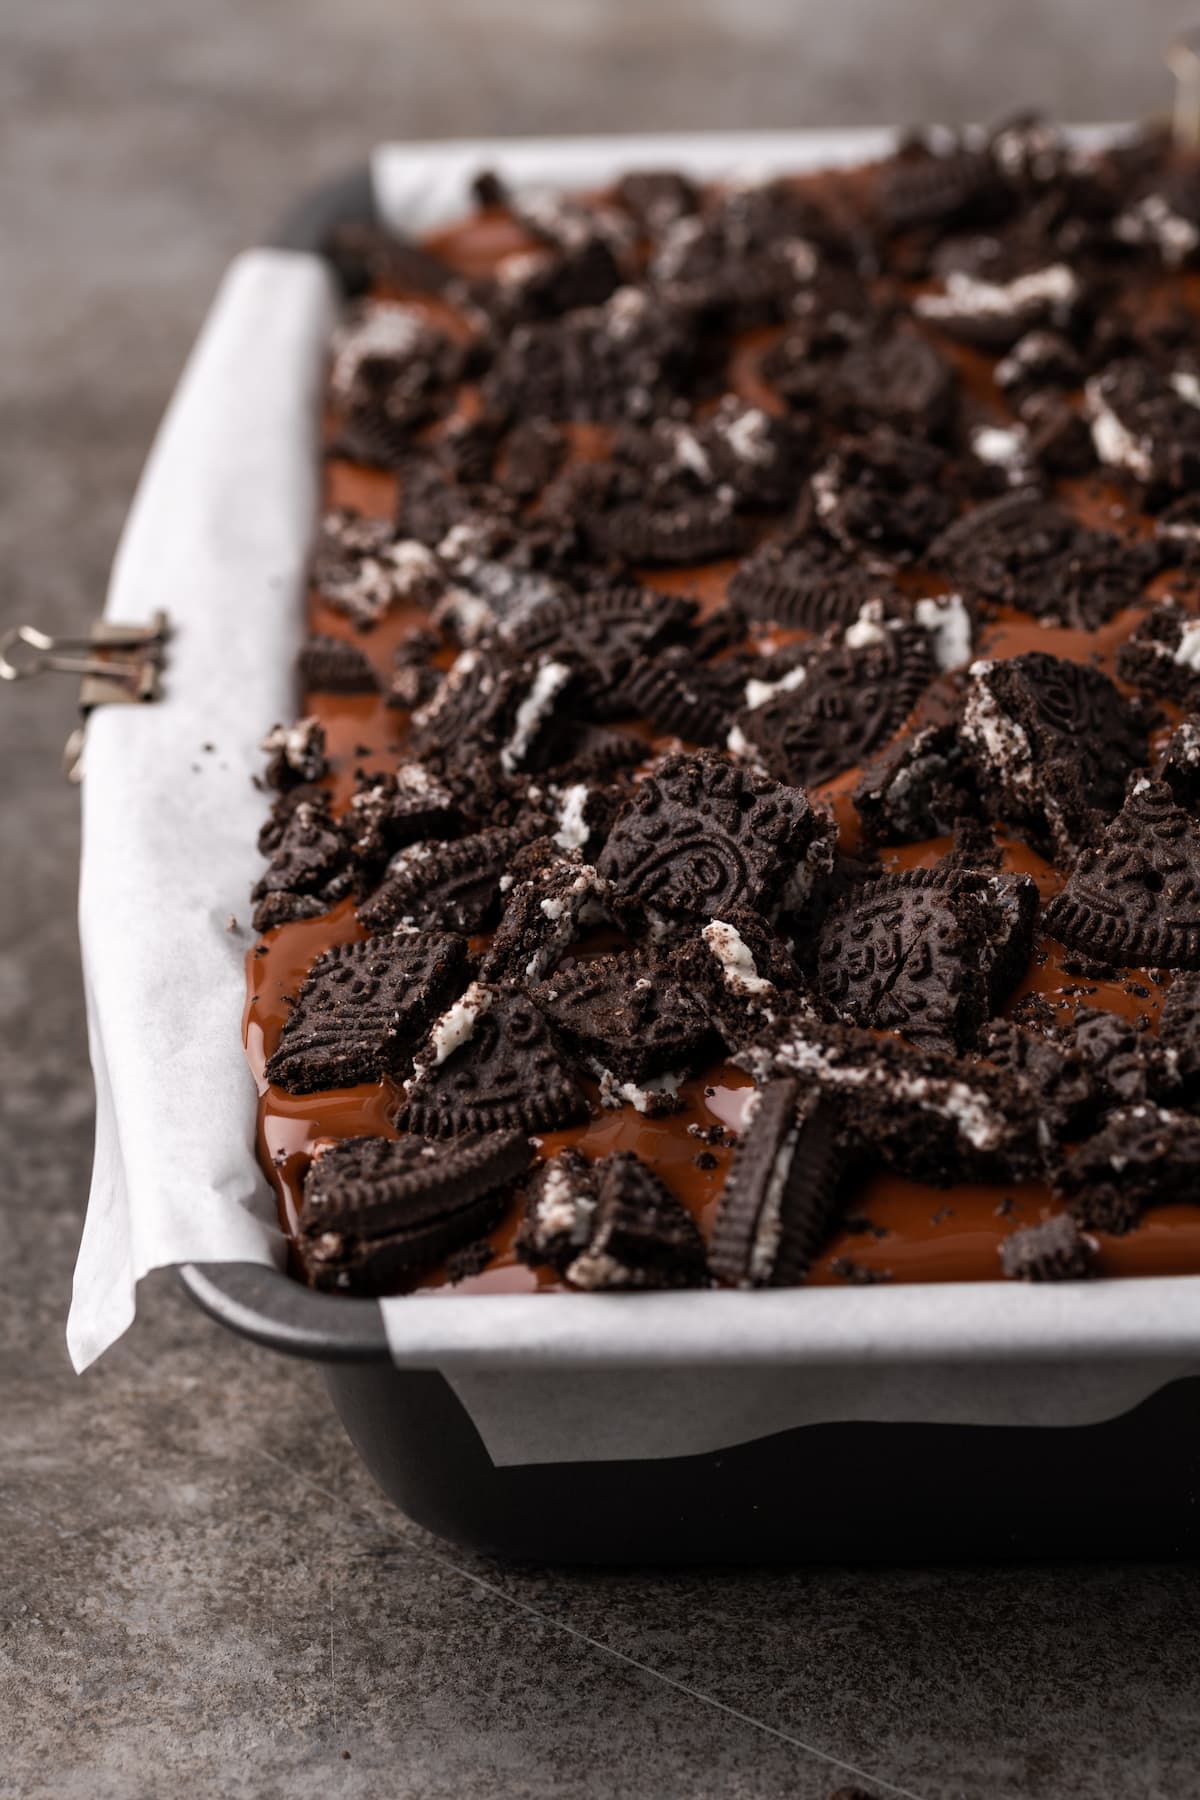 Chopped Oreo cookies are scattered over top Oreo brownies in a baking pan.